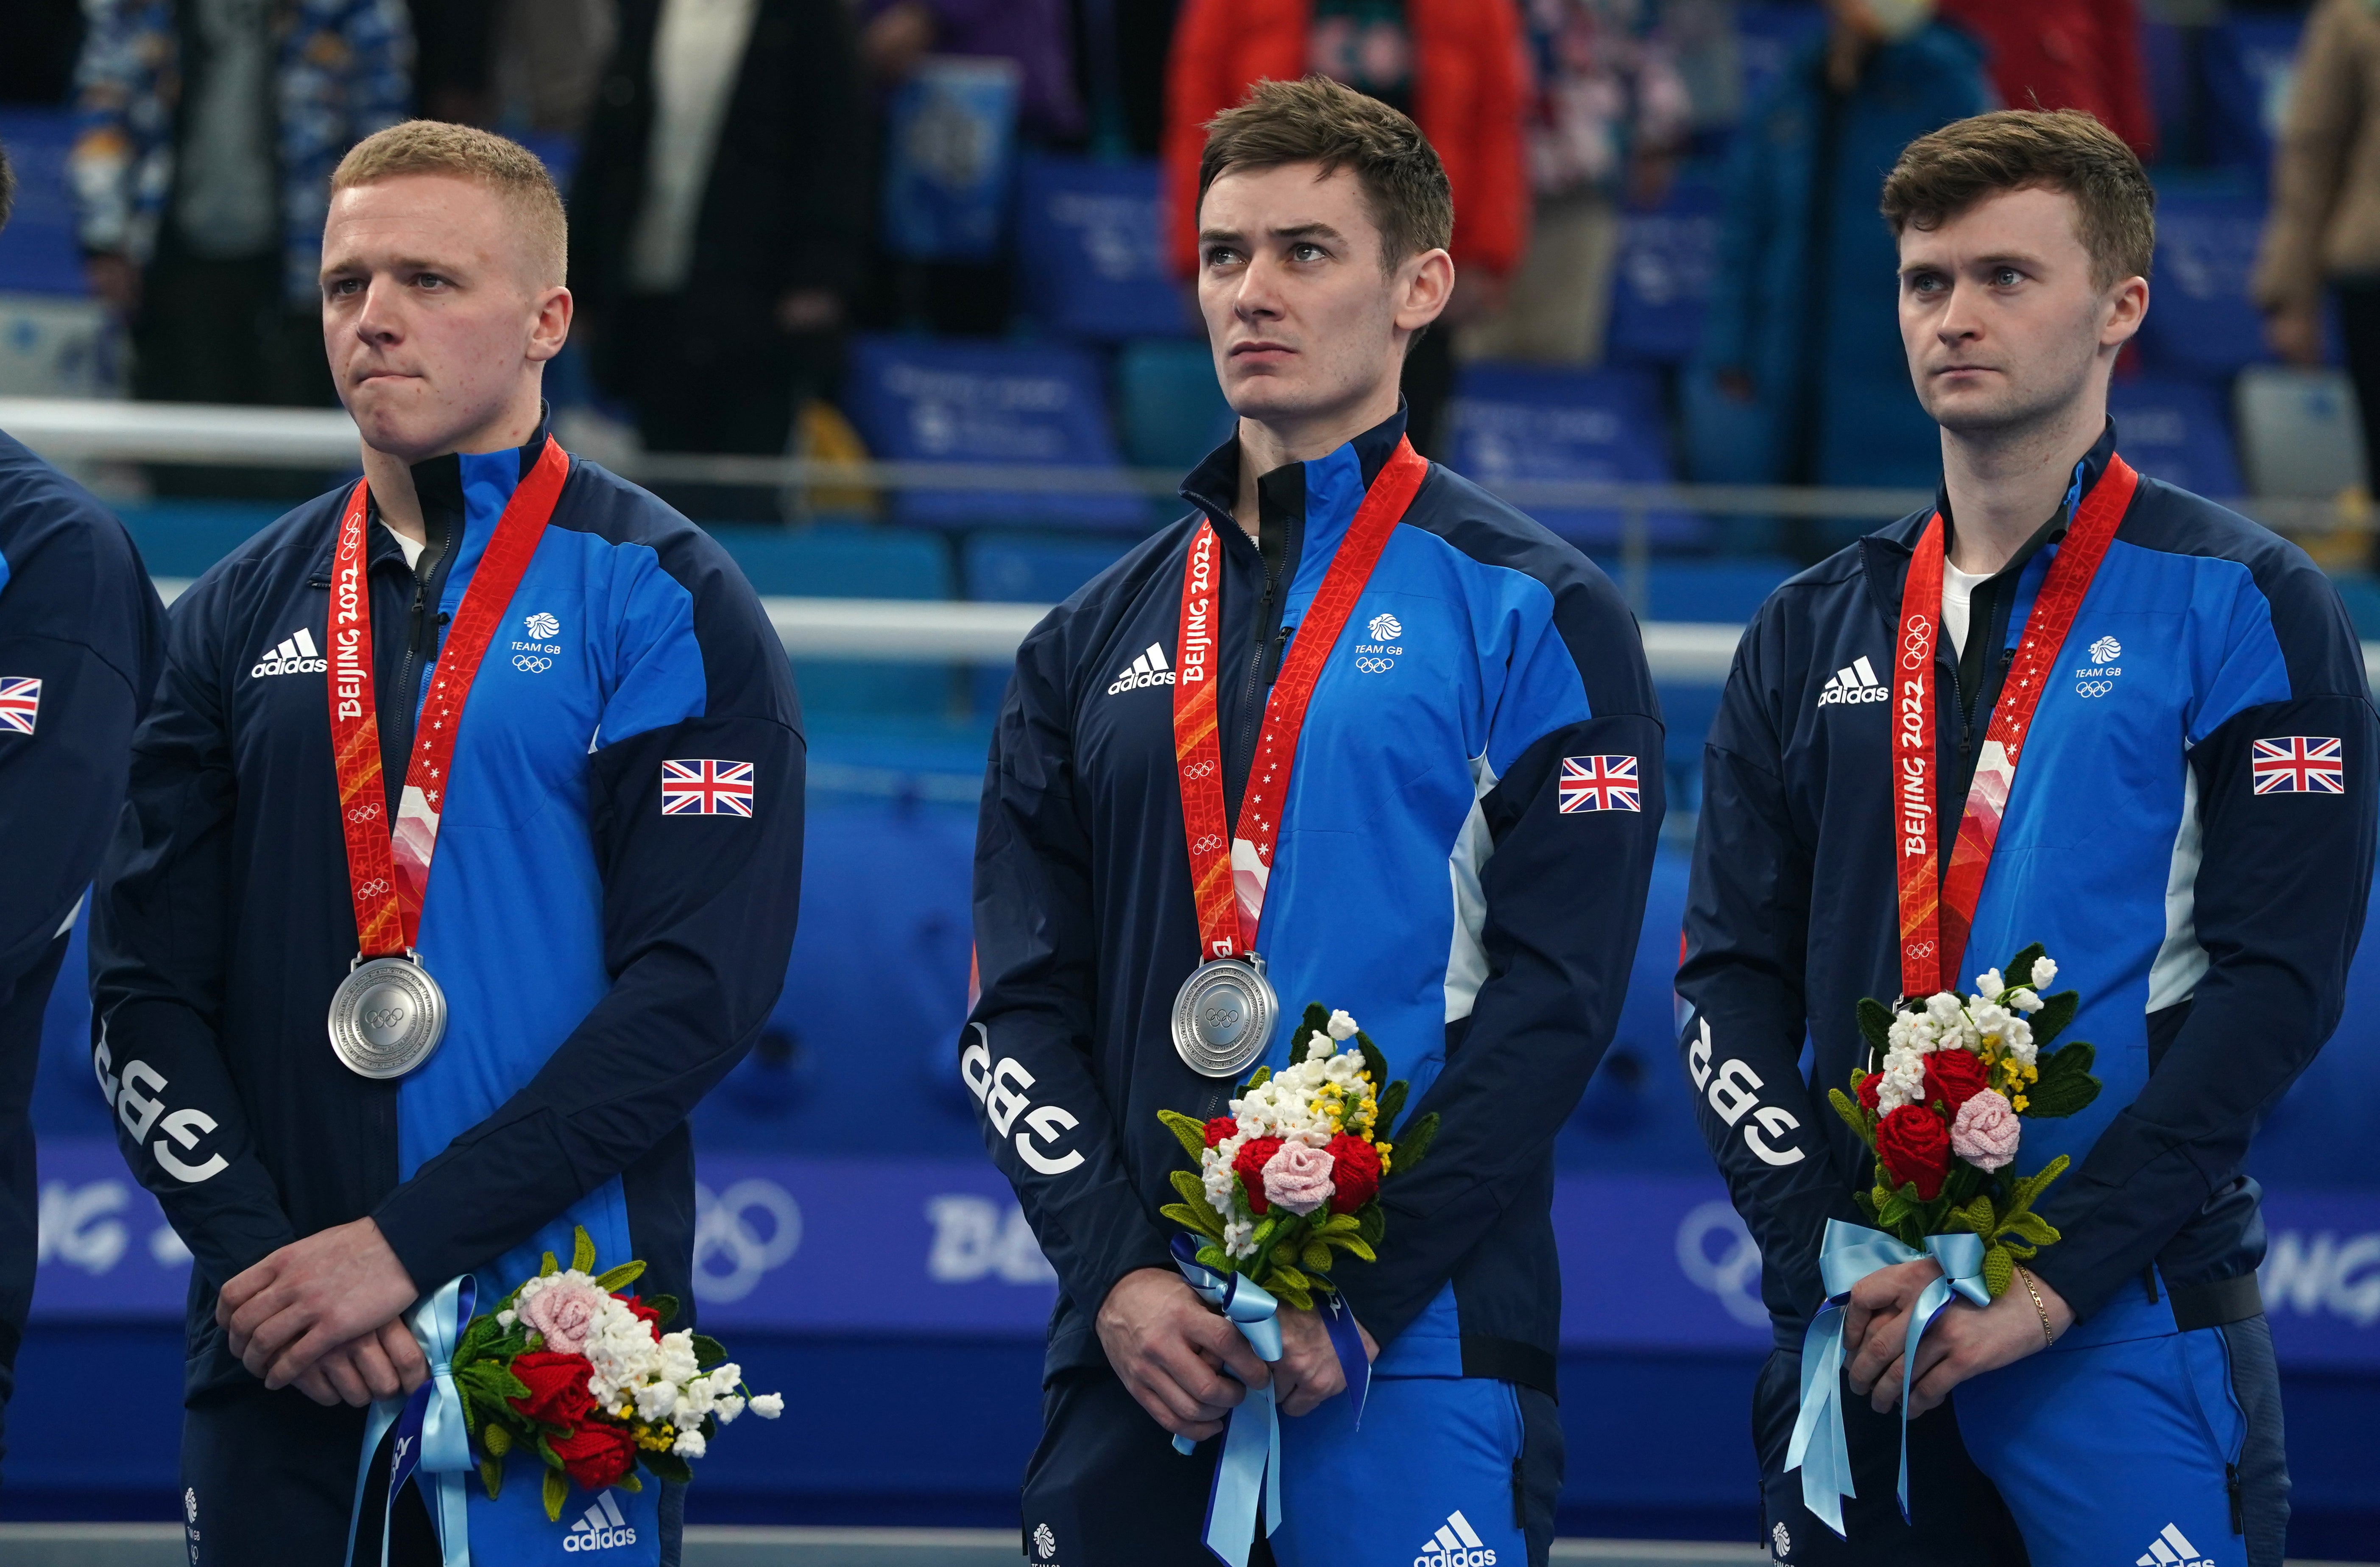 Great Britain settled for silver (Andrew Milligan/PA)